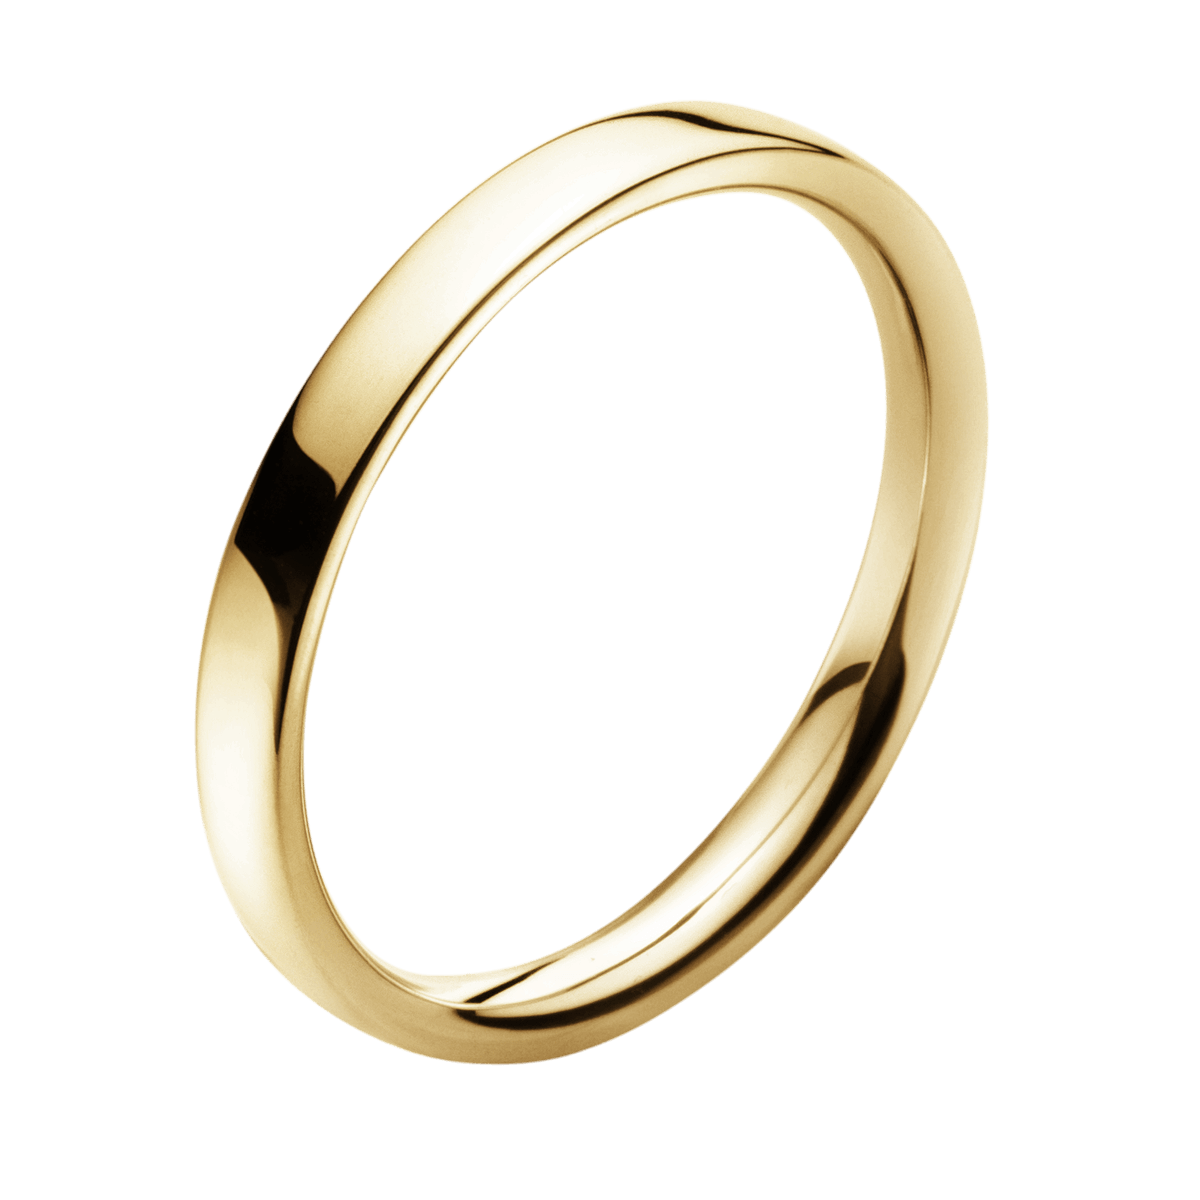 Single Gold Ring Jewelry Clip arts